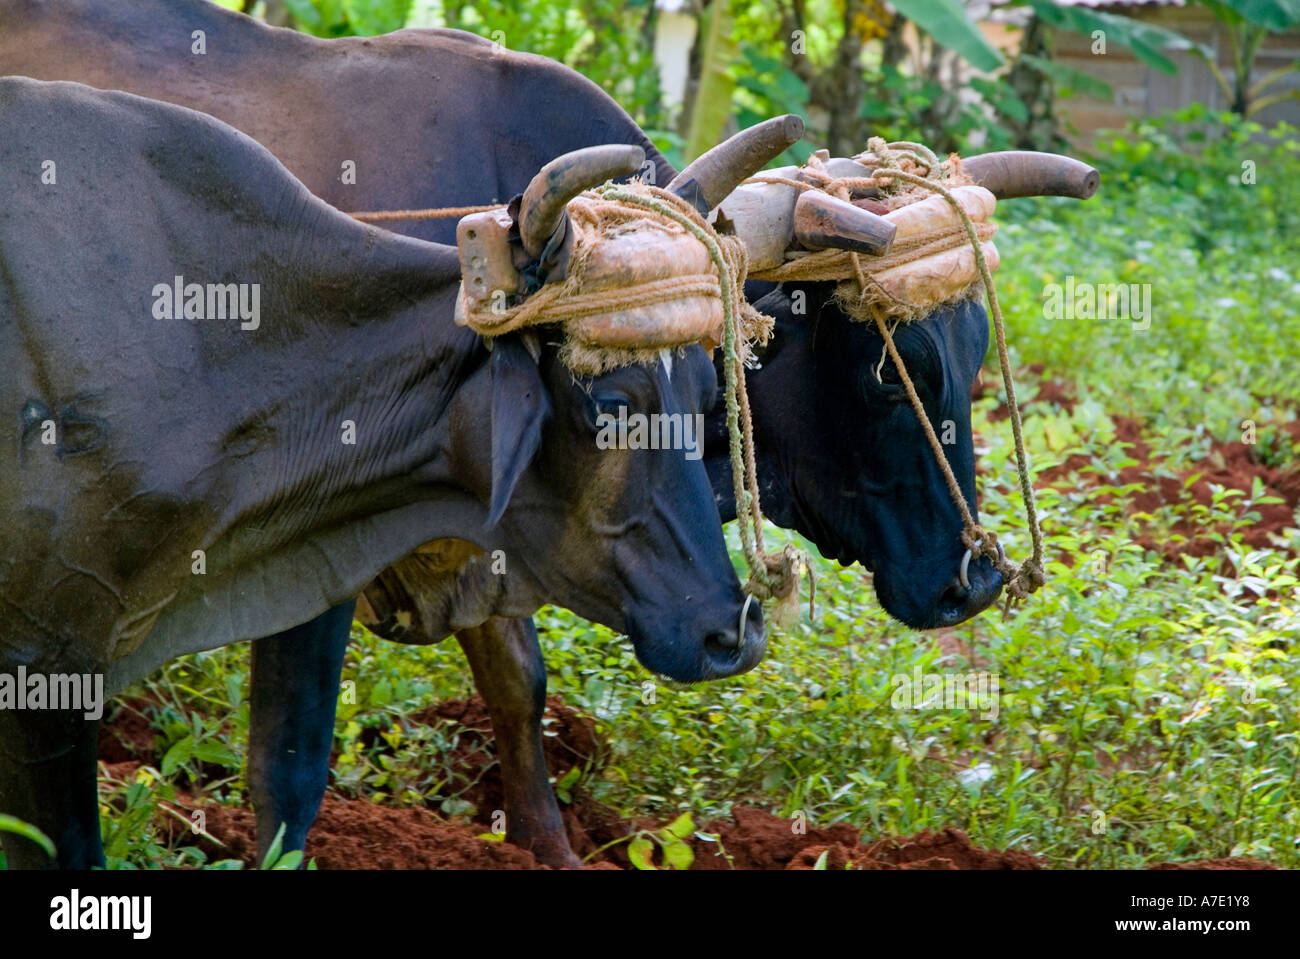 Two bulls / oxen ploughing in a field, Vinales, Pinar Del Rio Province, Cuba. Stock Photo